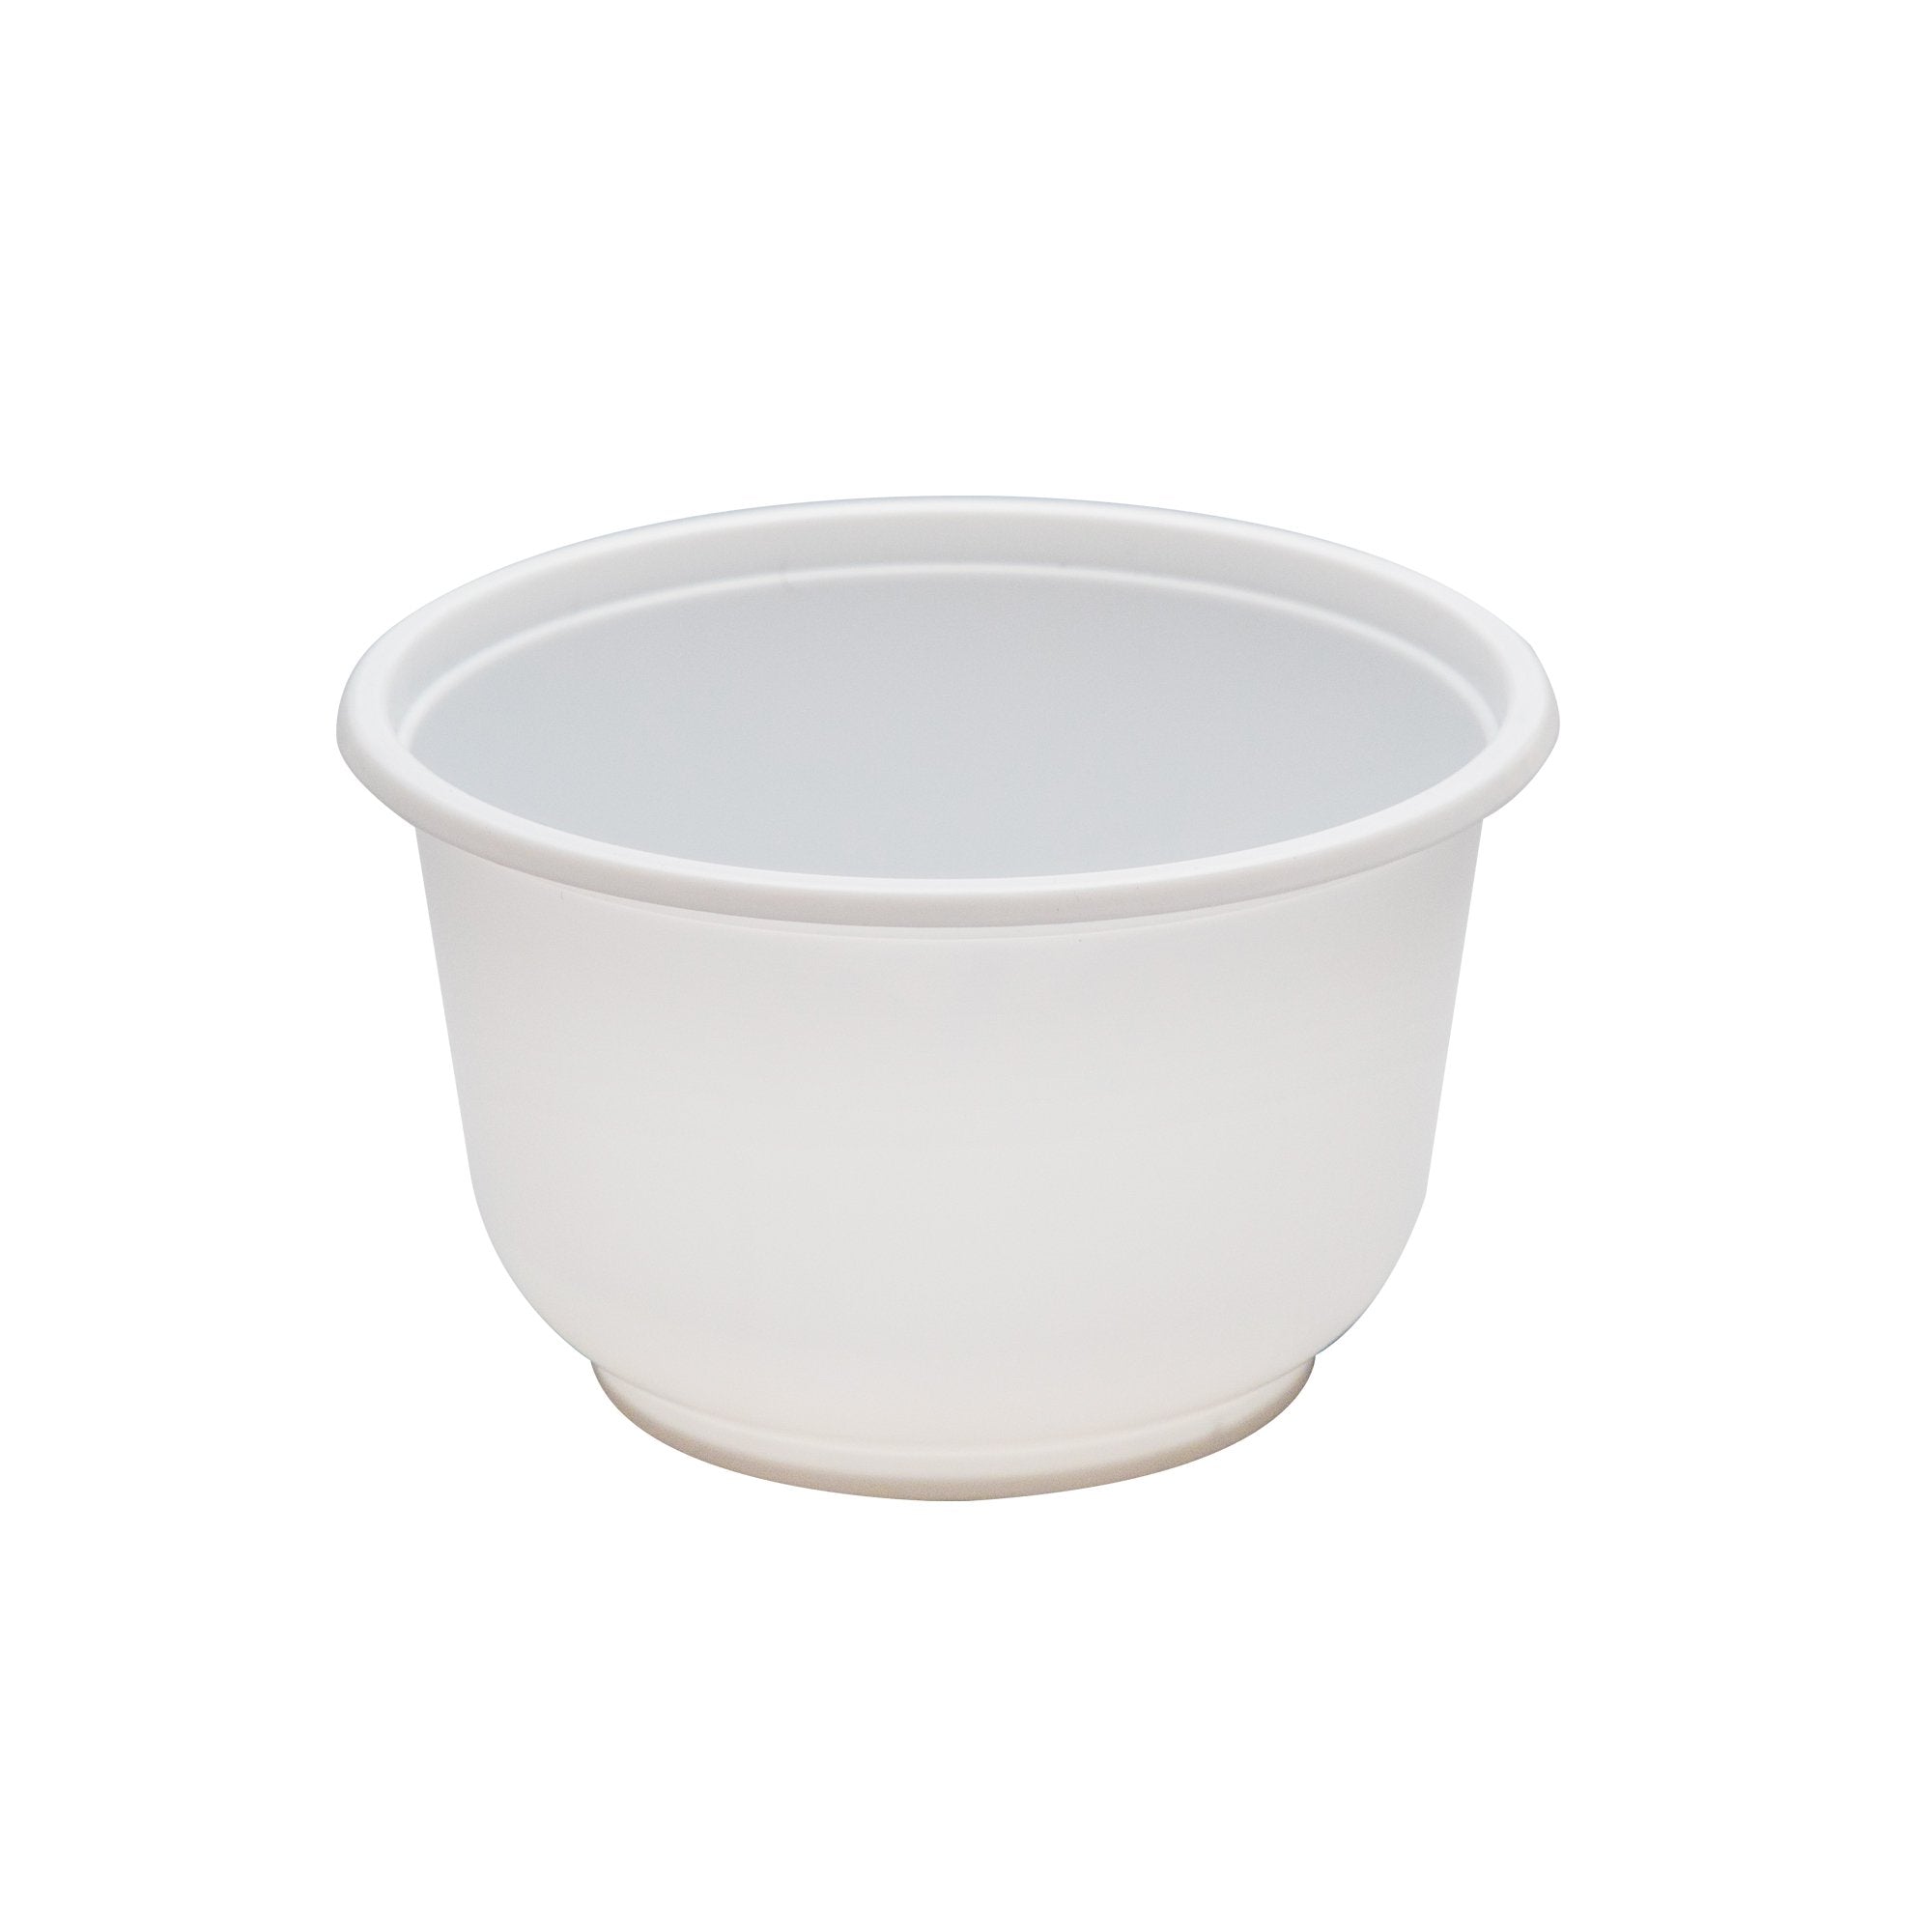 Microwavable PP Injection To Go Bowl 16 oz- White (1000/case)